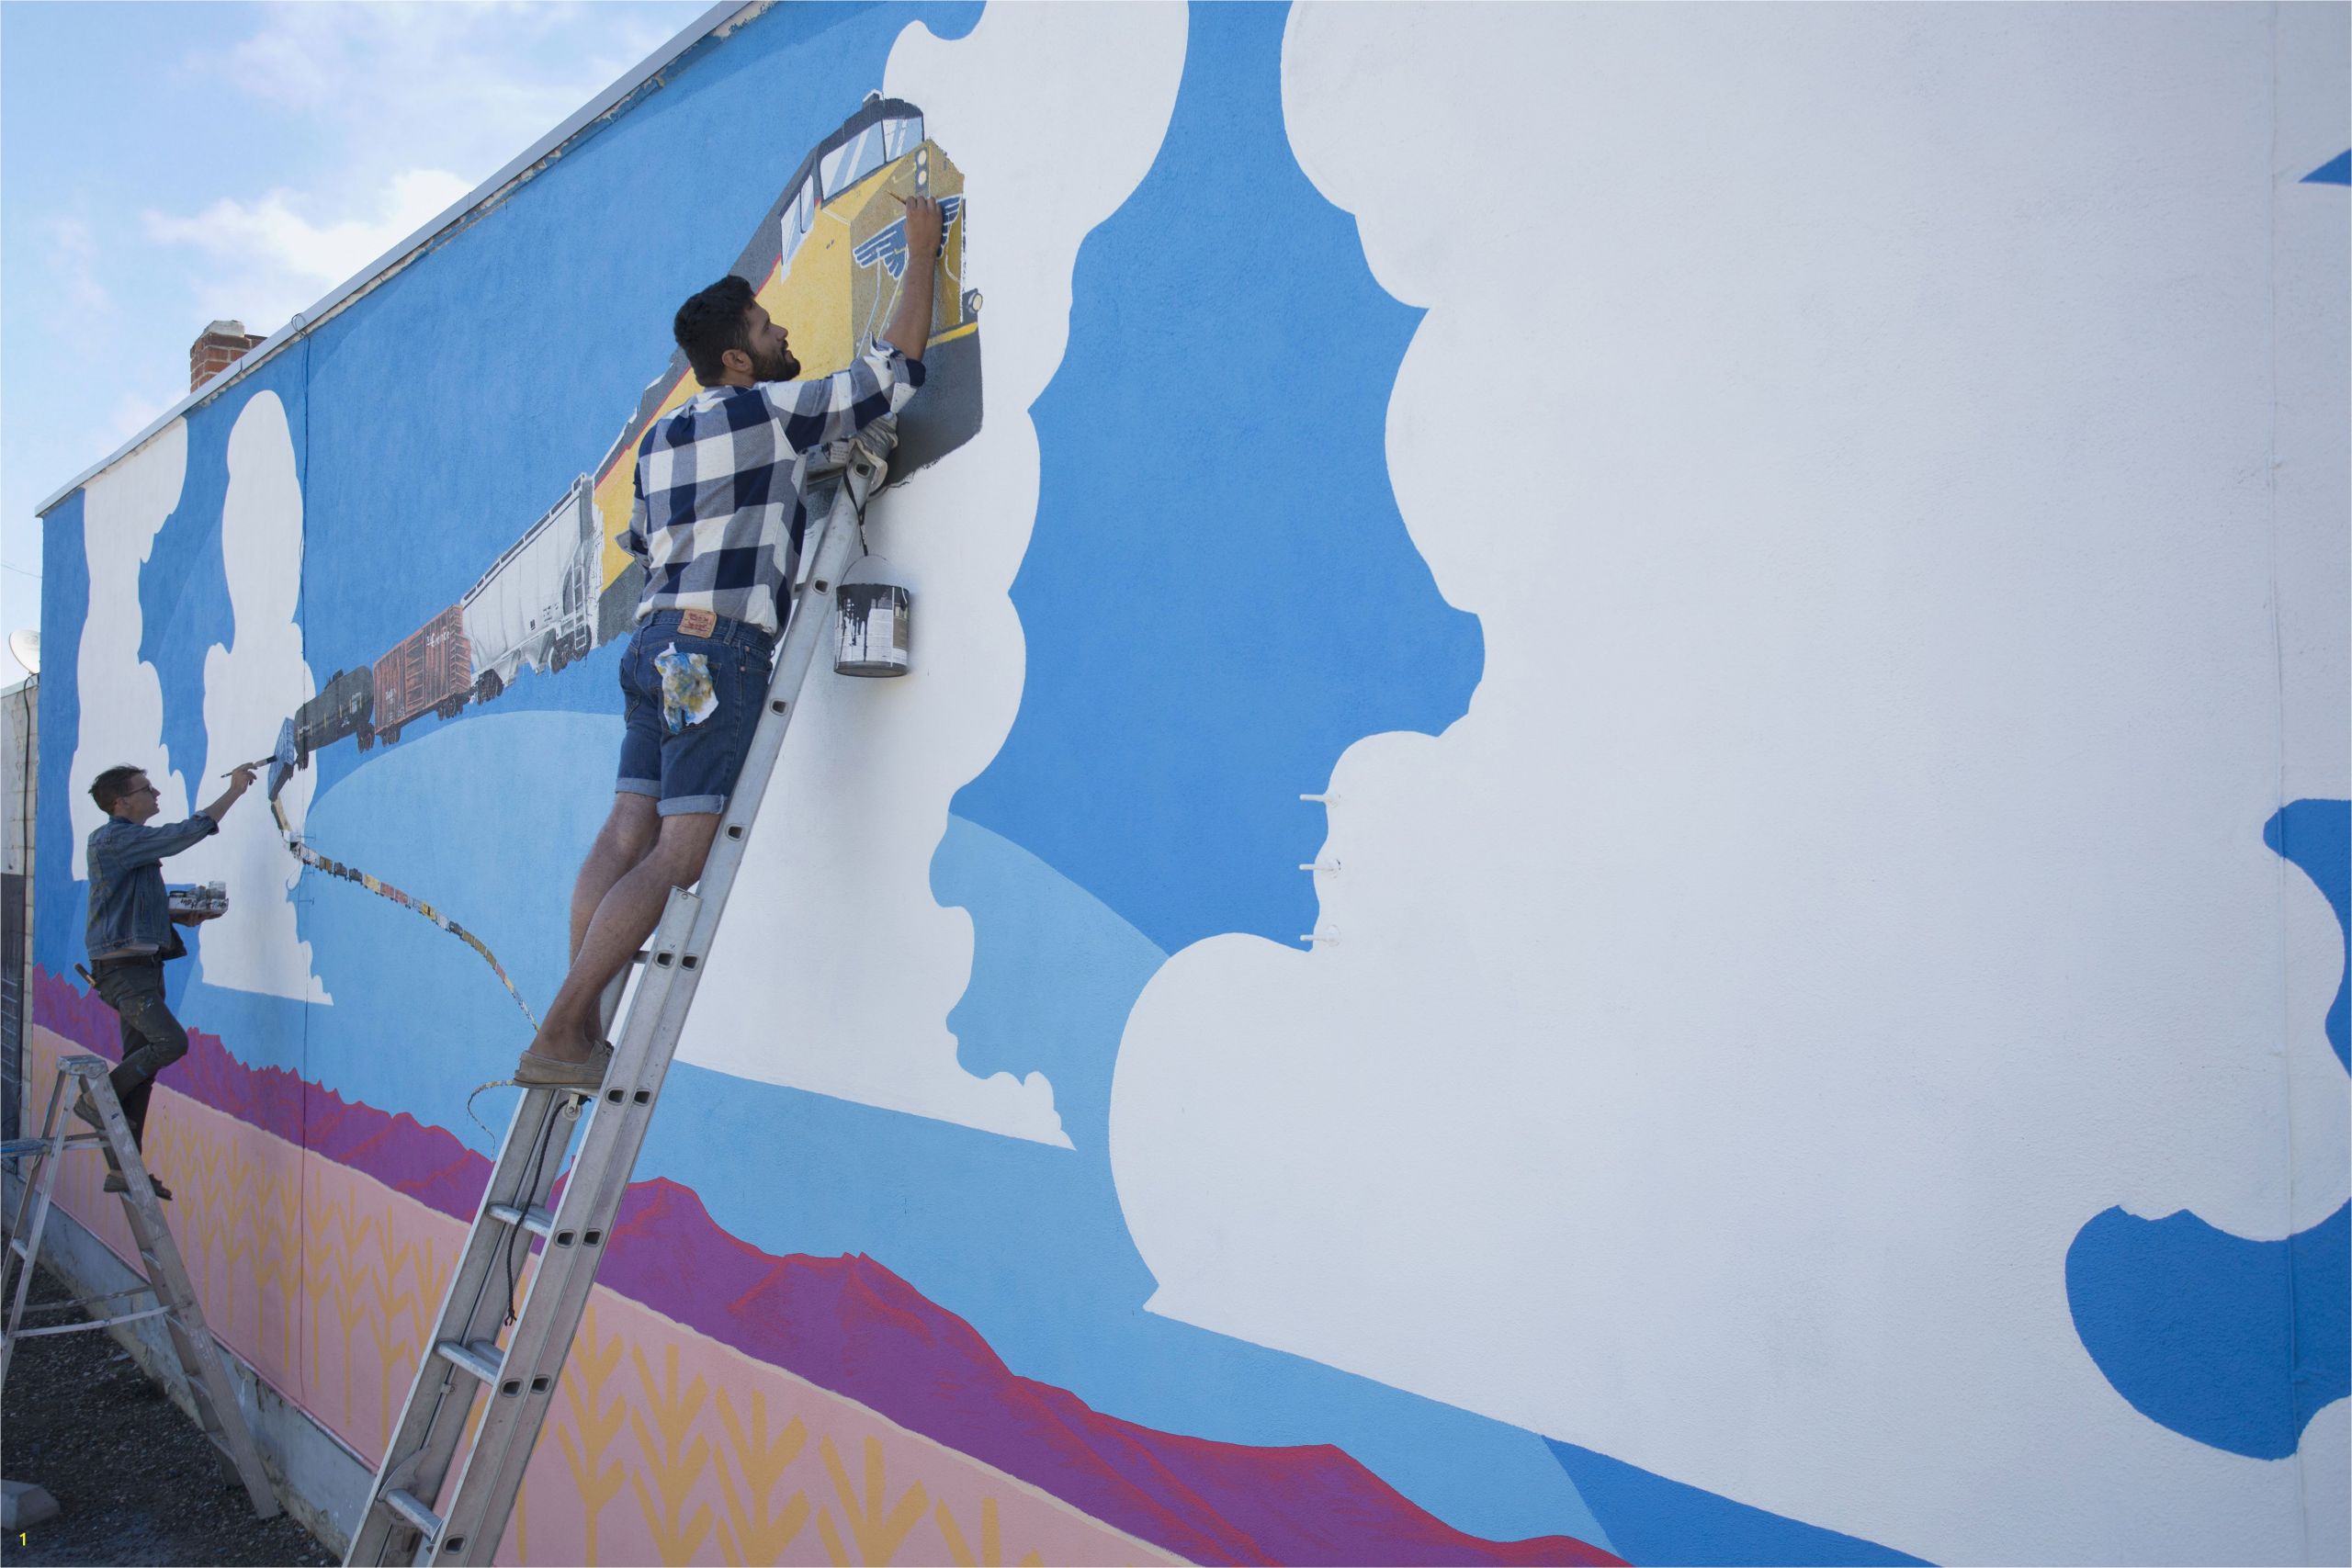 Wall Mural Artist Near Me Quick Tips On How to Paint A Wall Mural